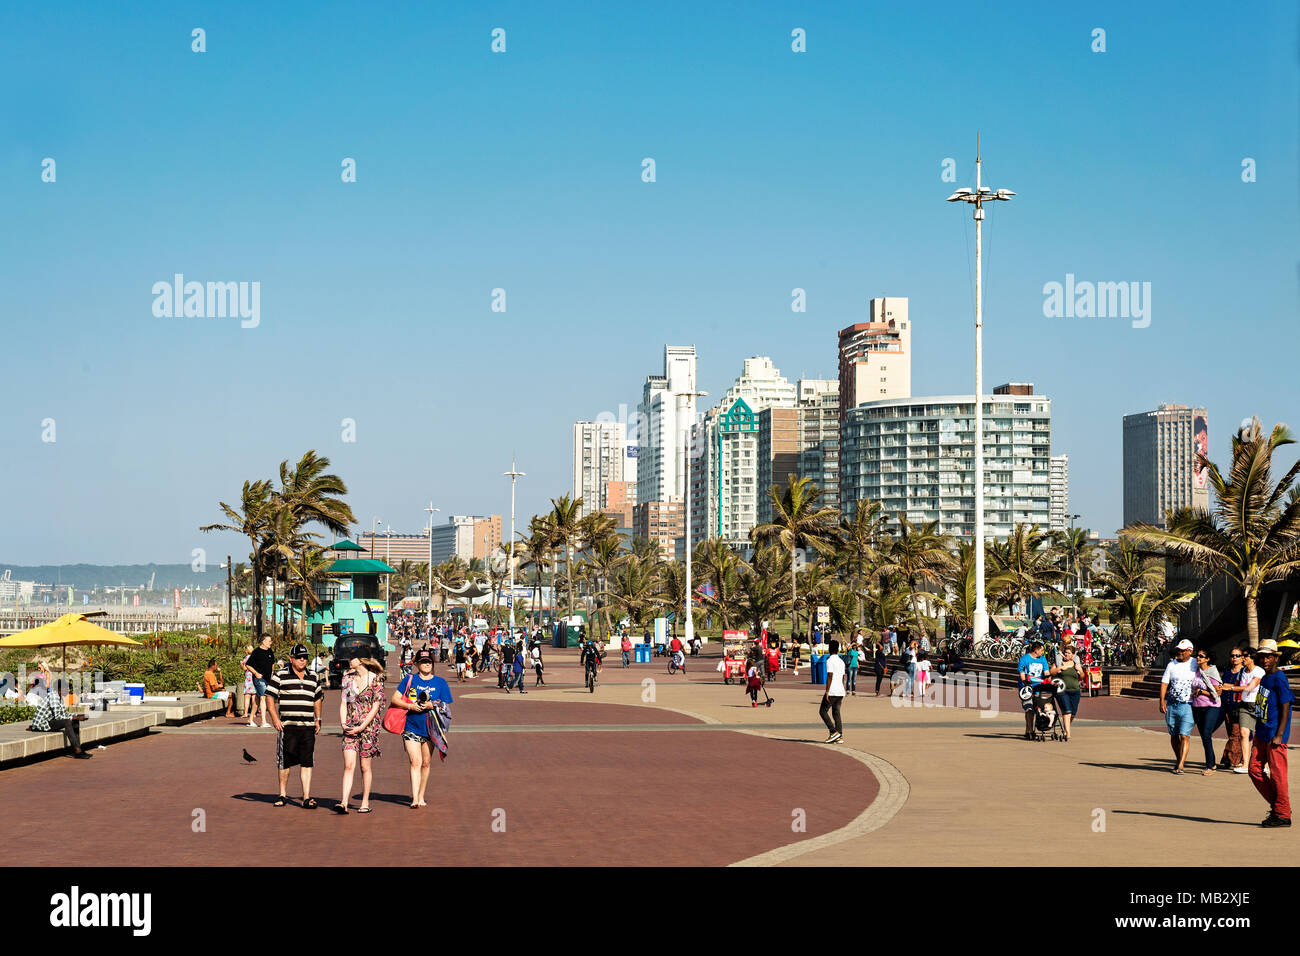 Durban - South Africa - July 2, 2017. The Durban Addington Beach Promenade is host to sports activities such as cycling and running and hikers. Stock Photo